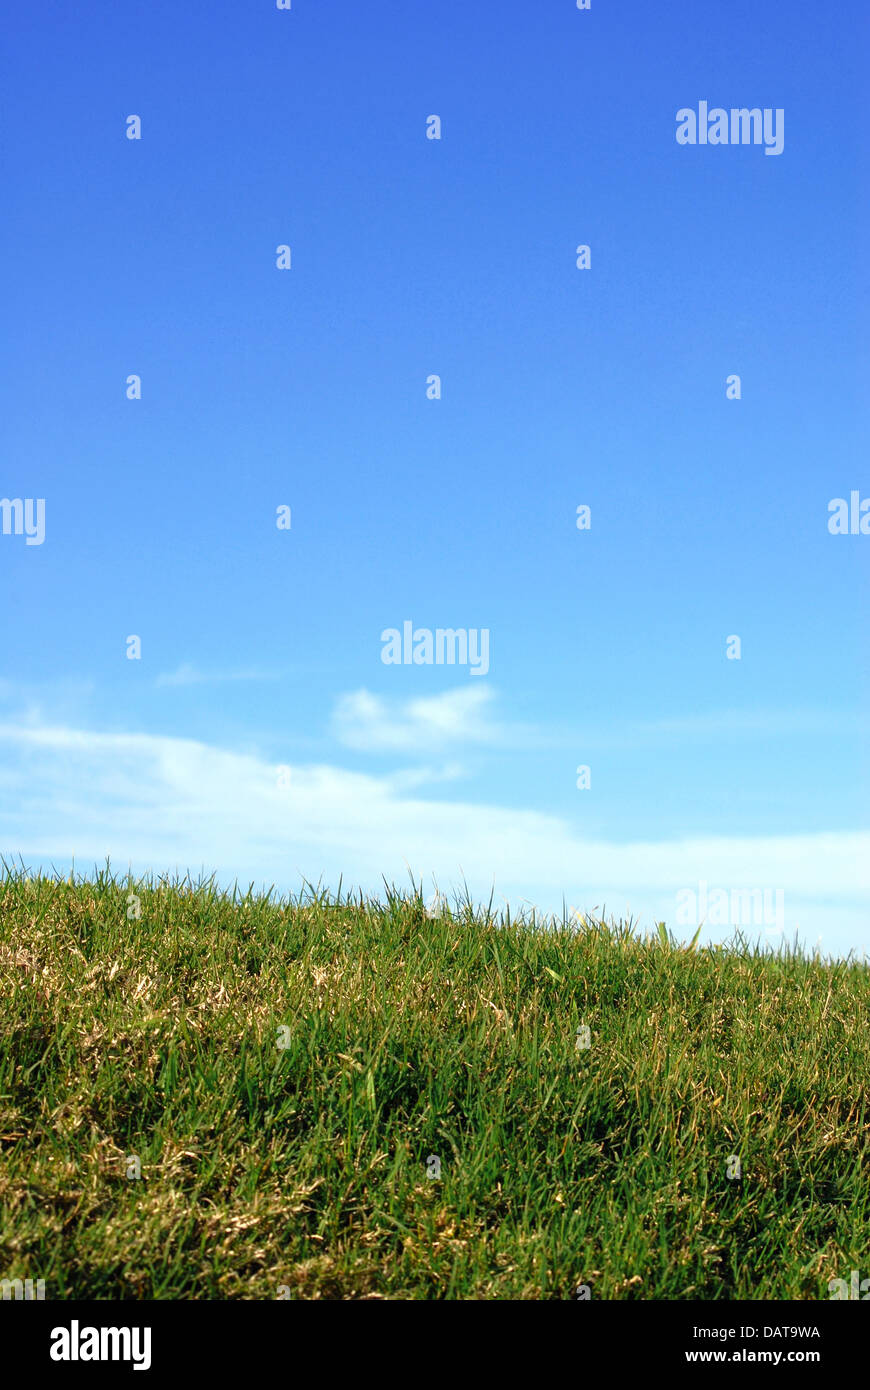 Green grass, blue sky and white clouds Stock Photo